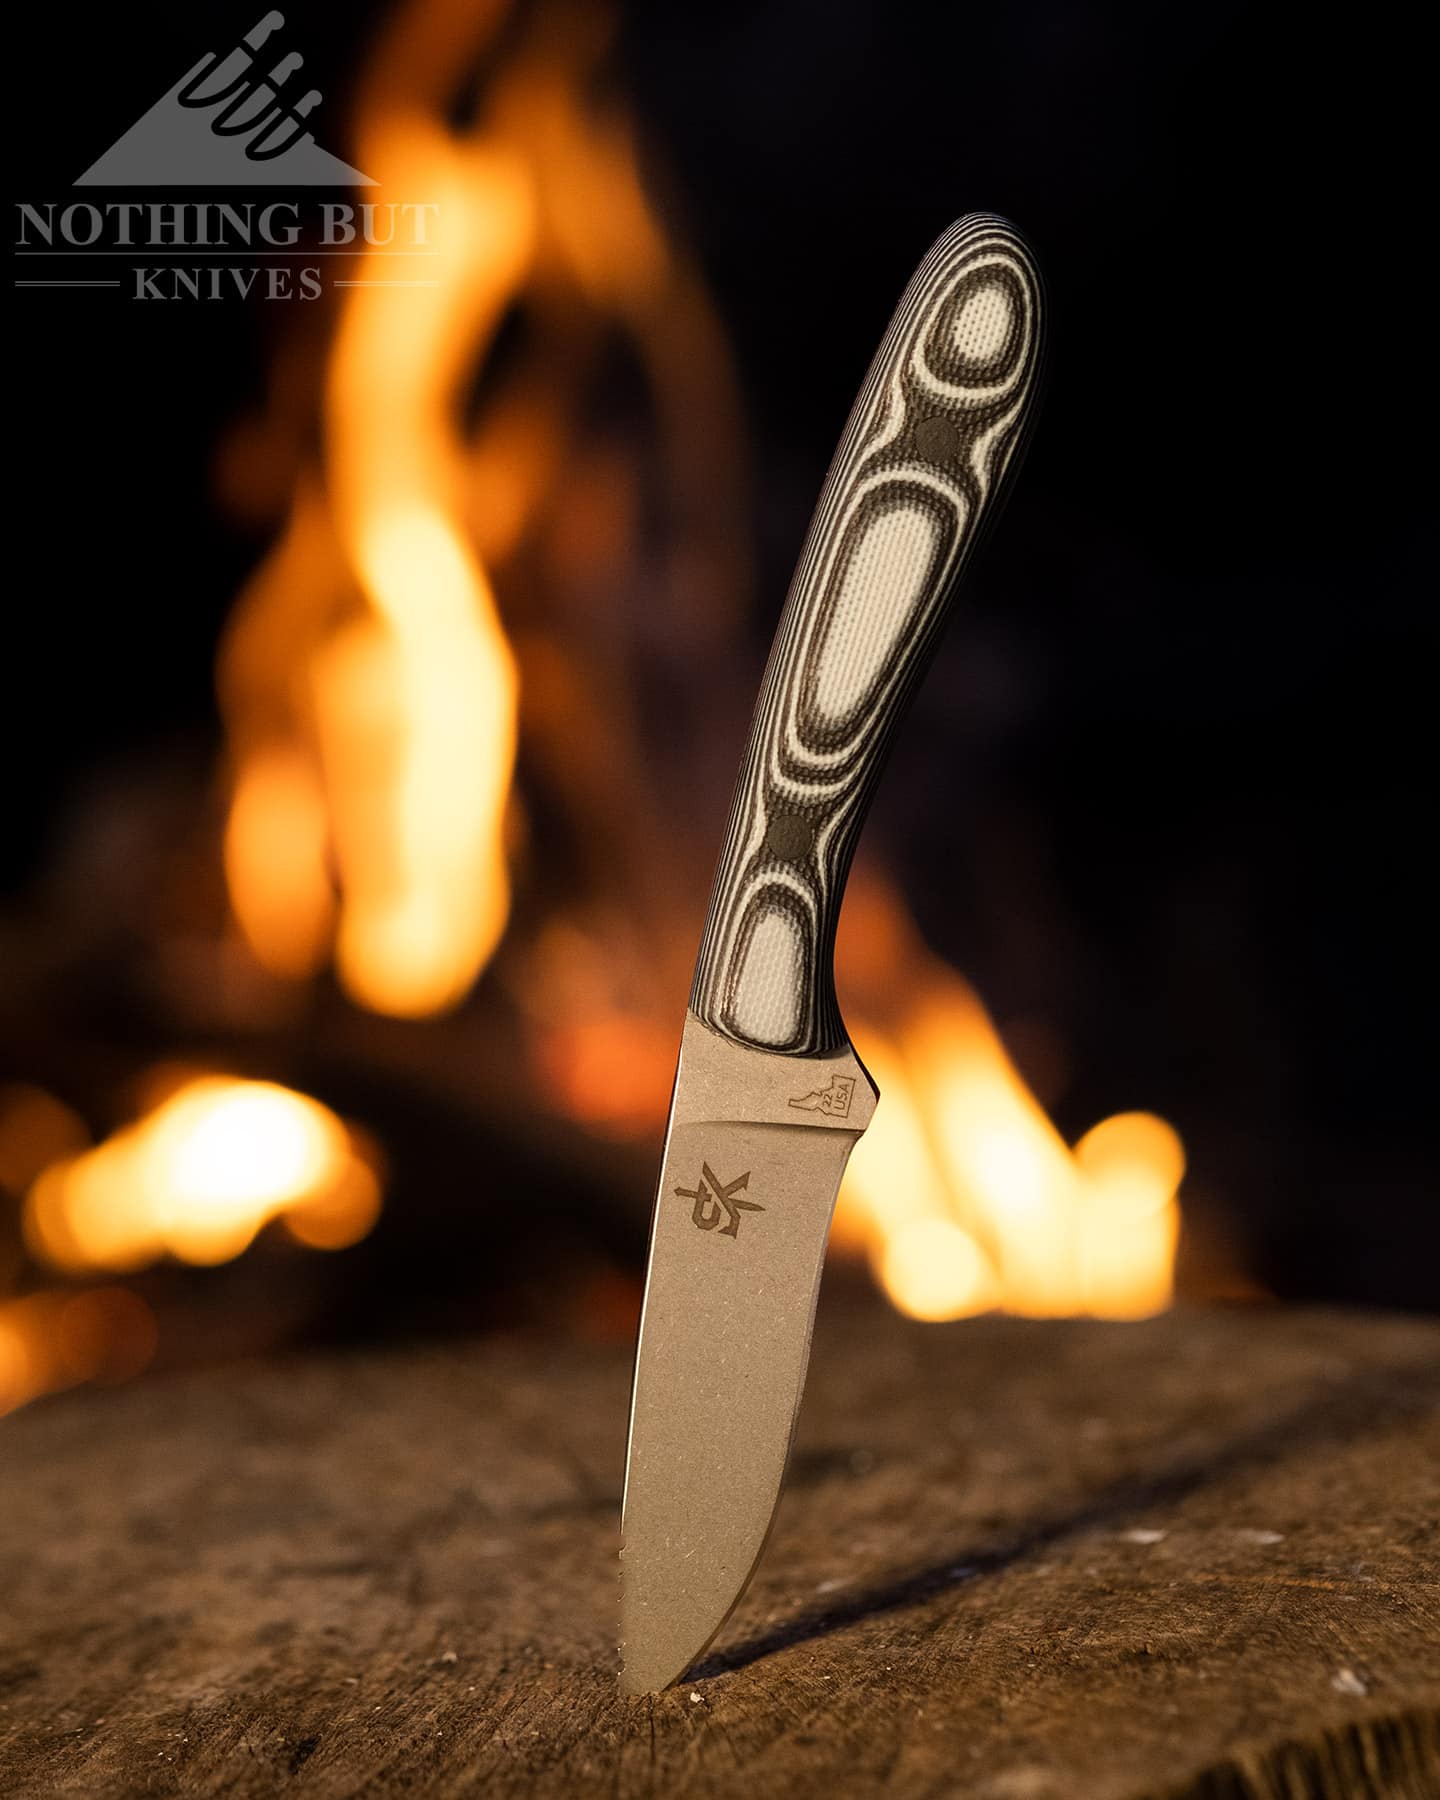 Camping With The Schenk Knives Pitka